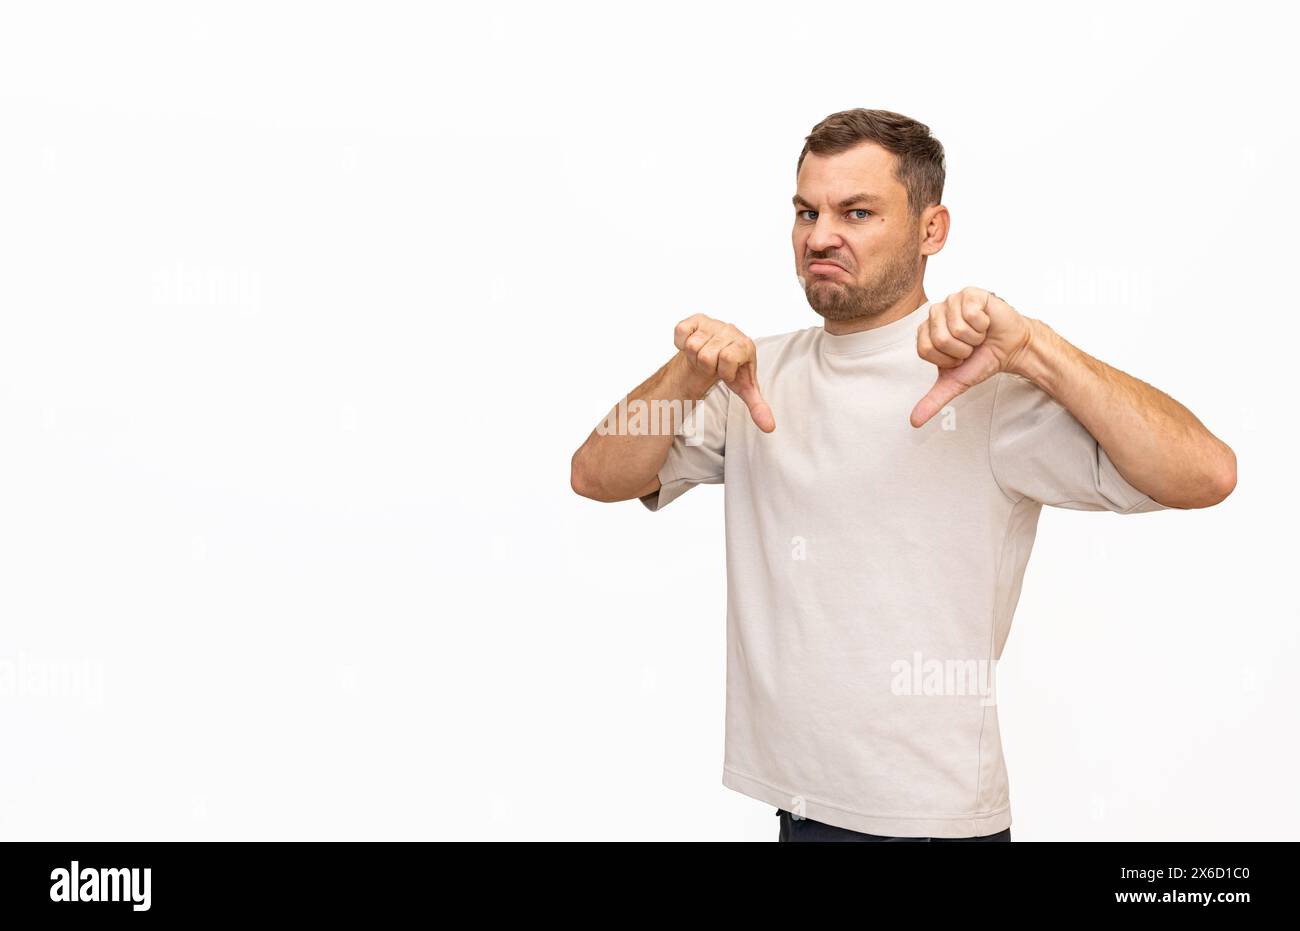 Dissatisfied man shows thumbs down on white background in studio. Male person expressing disapproval, disagreement, or dissatisfaction. Stock Photo